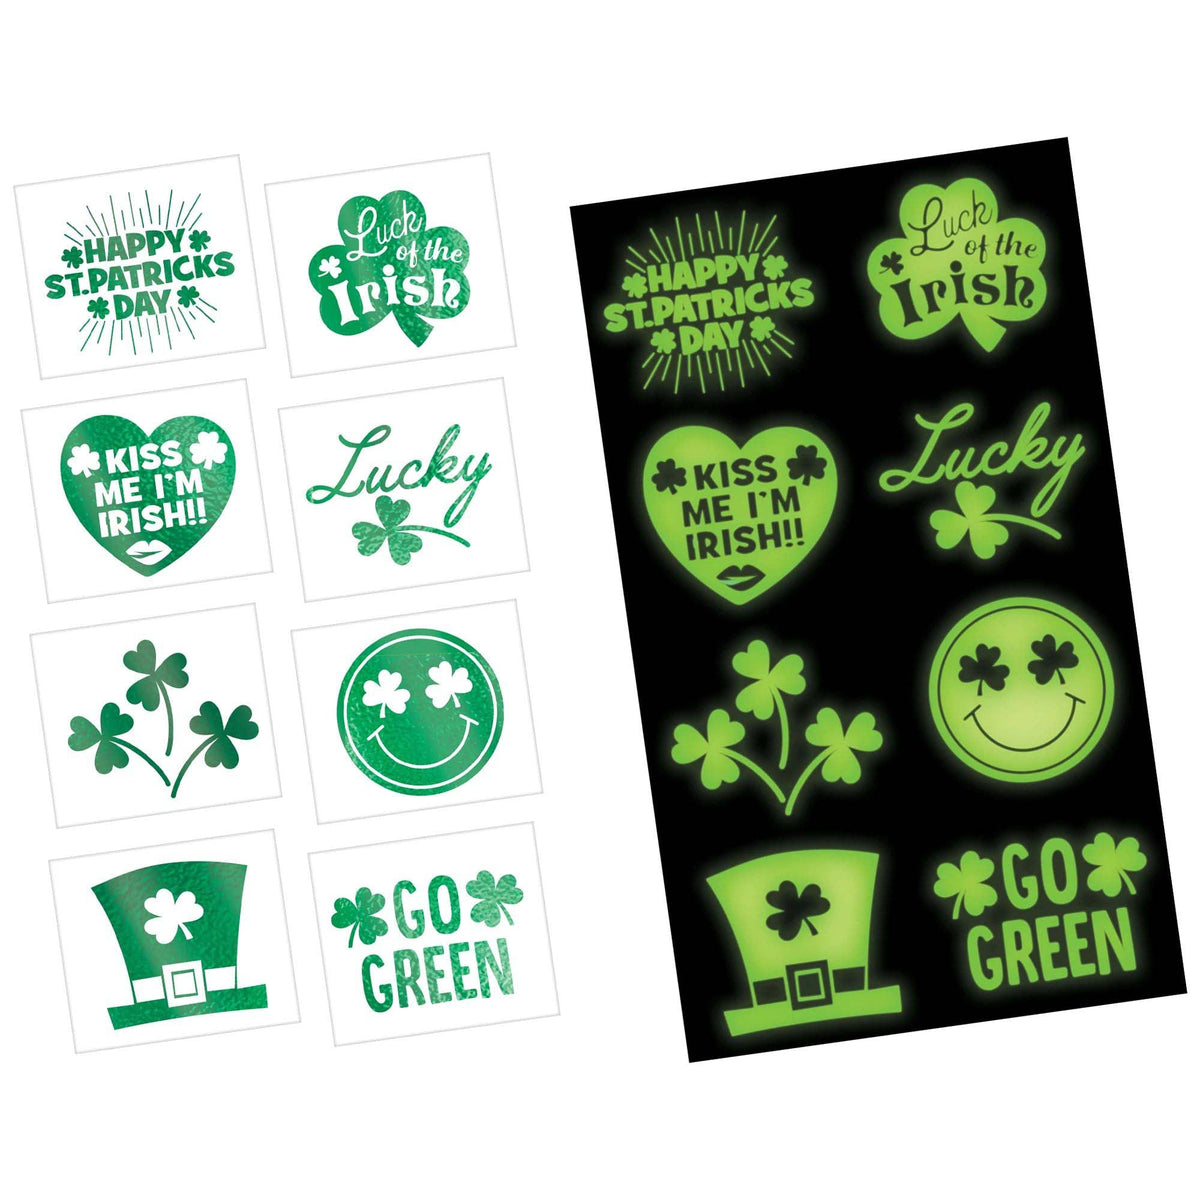 AMSCAN CA St-Patrick St-Patrick's Day Glow-In-the-Dark Tattoo Sheets, 2 Count